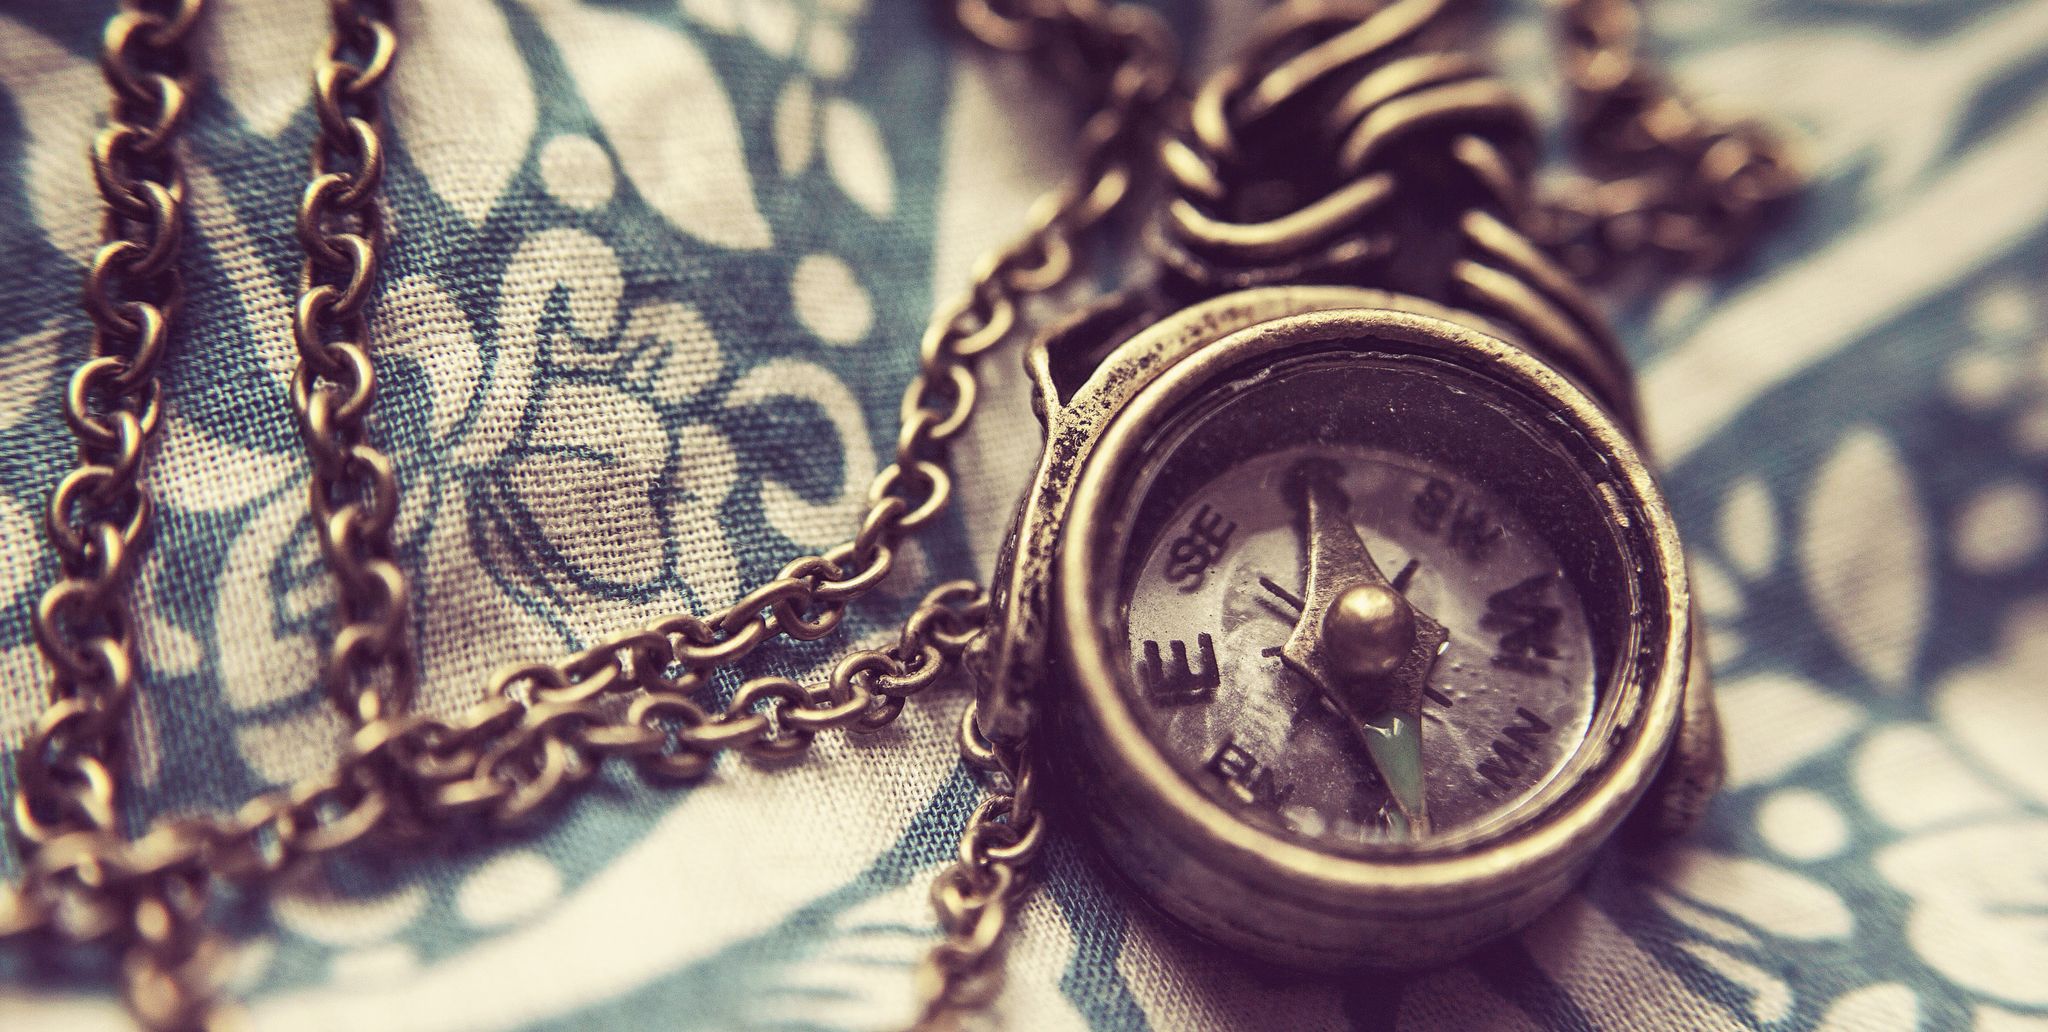 Pocket watch, Pendant, Locket, Fashion accessory, Watch, Close-up, Design, Jewellery, Material property, Chain, 